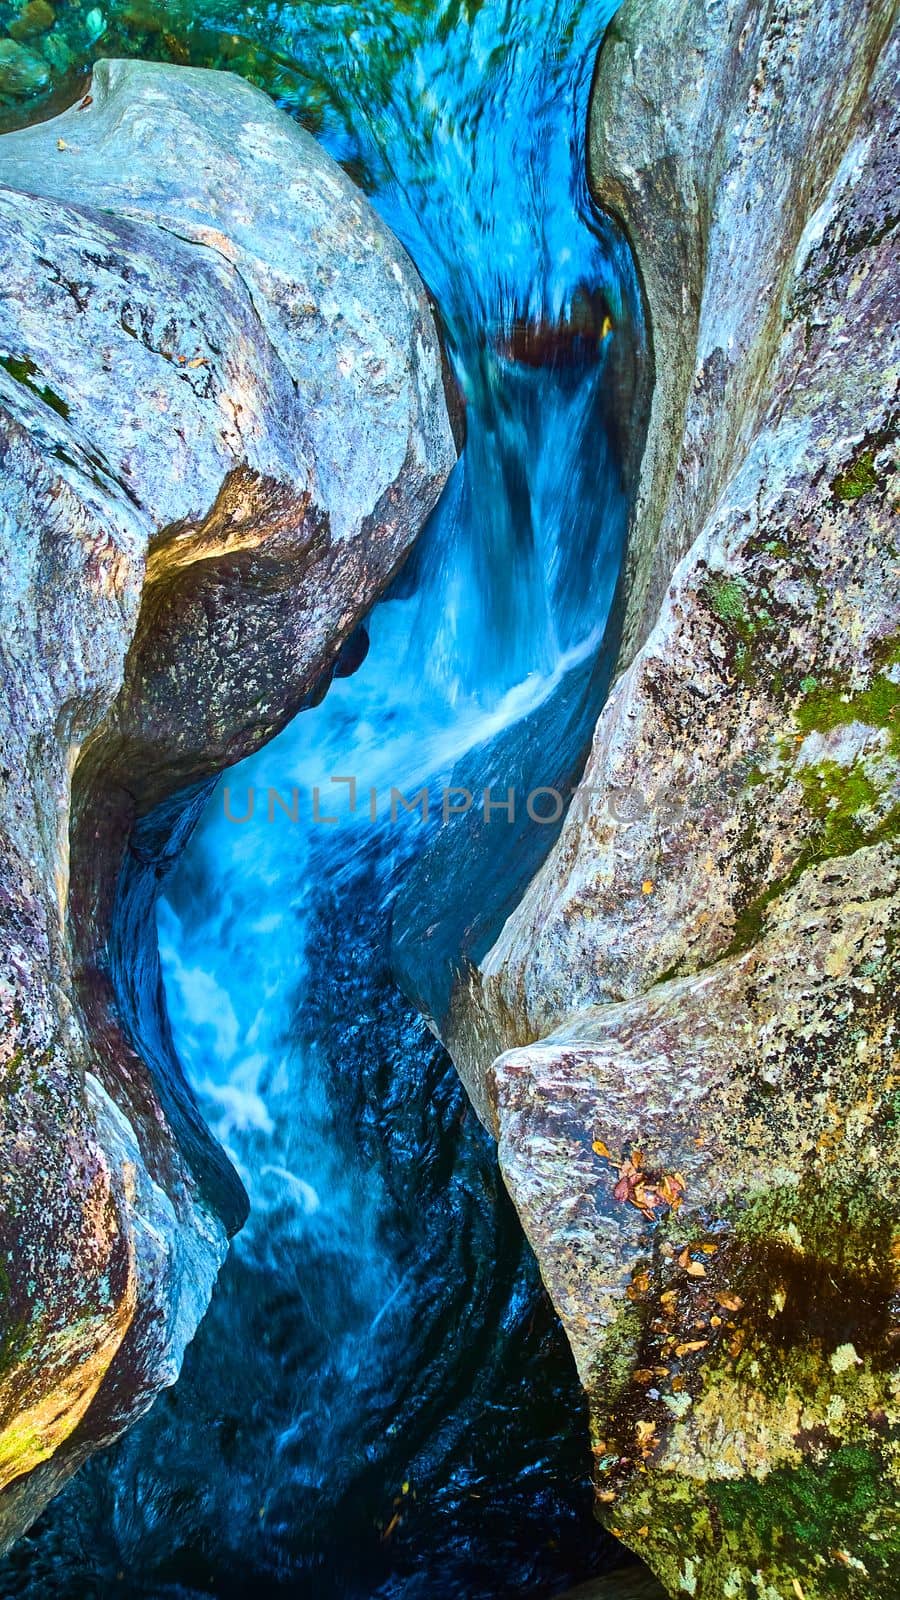 Looking down raging rapids river funneling between two walls of rock in detail by njproductions